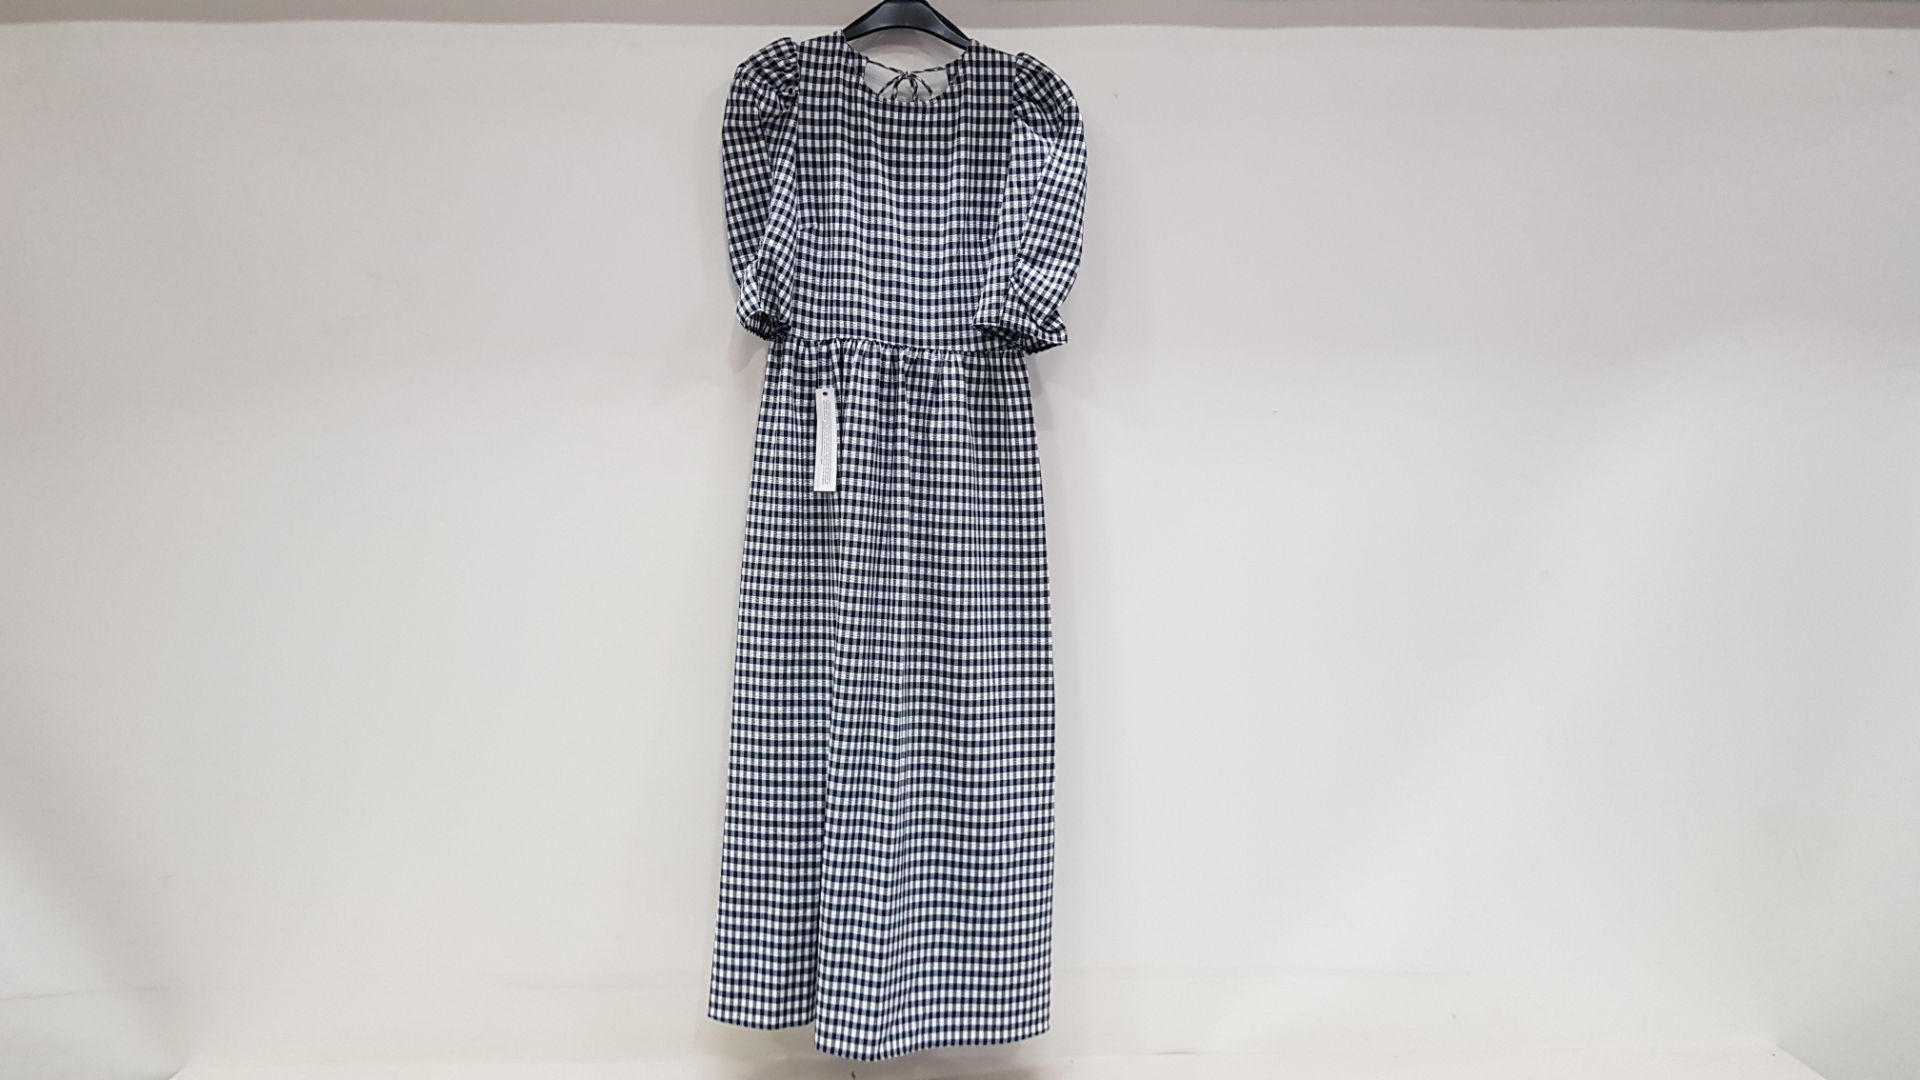 10 X BRAND NEW TOPSHOP BLUE CHEQUERED LONG DRESSES UK SIZE 8 AND 12RRP-£45.00 TOTAL RRP-£ 450.00 (